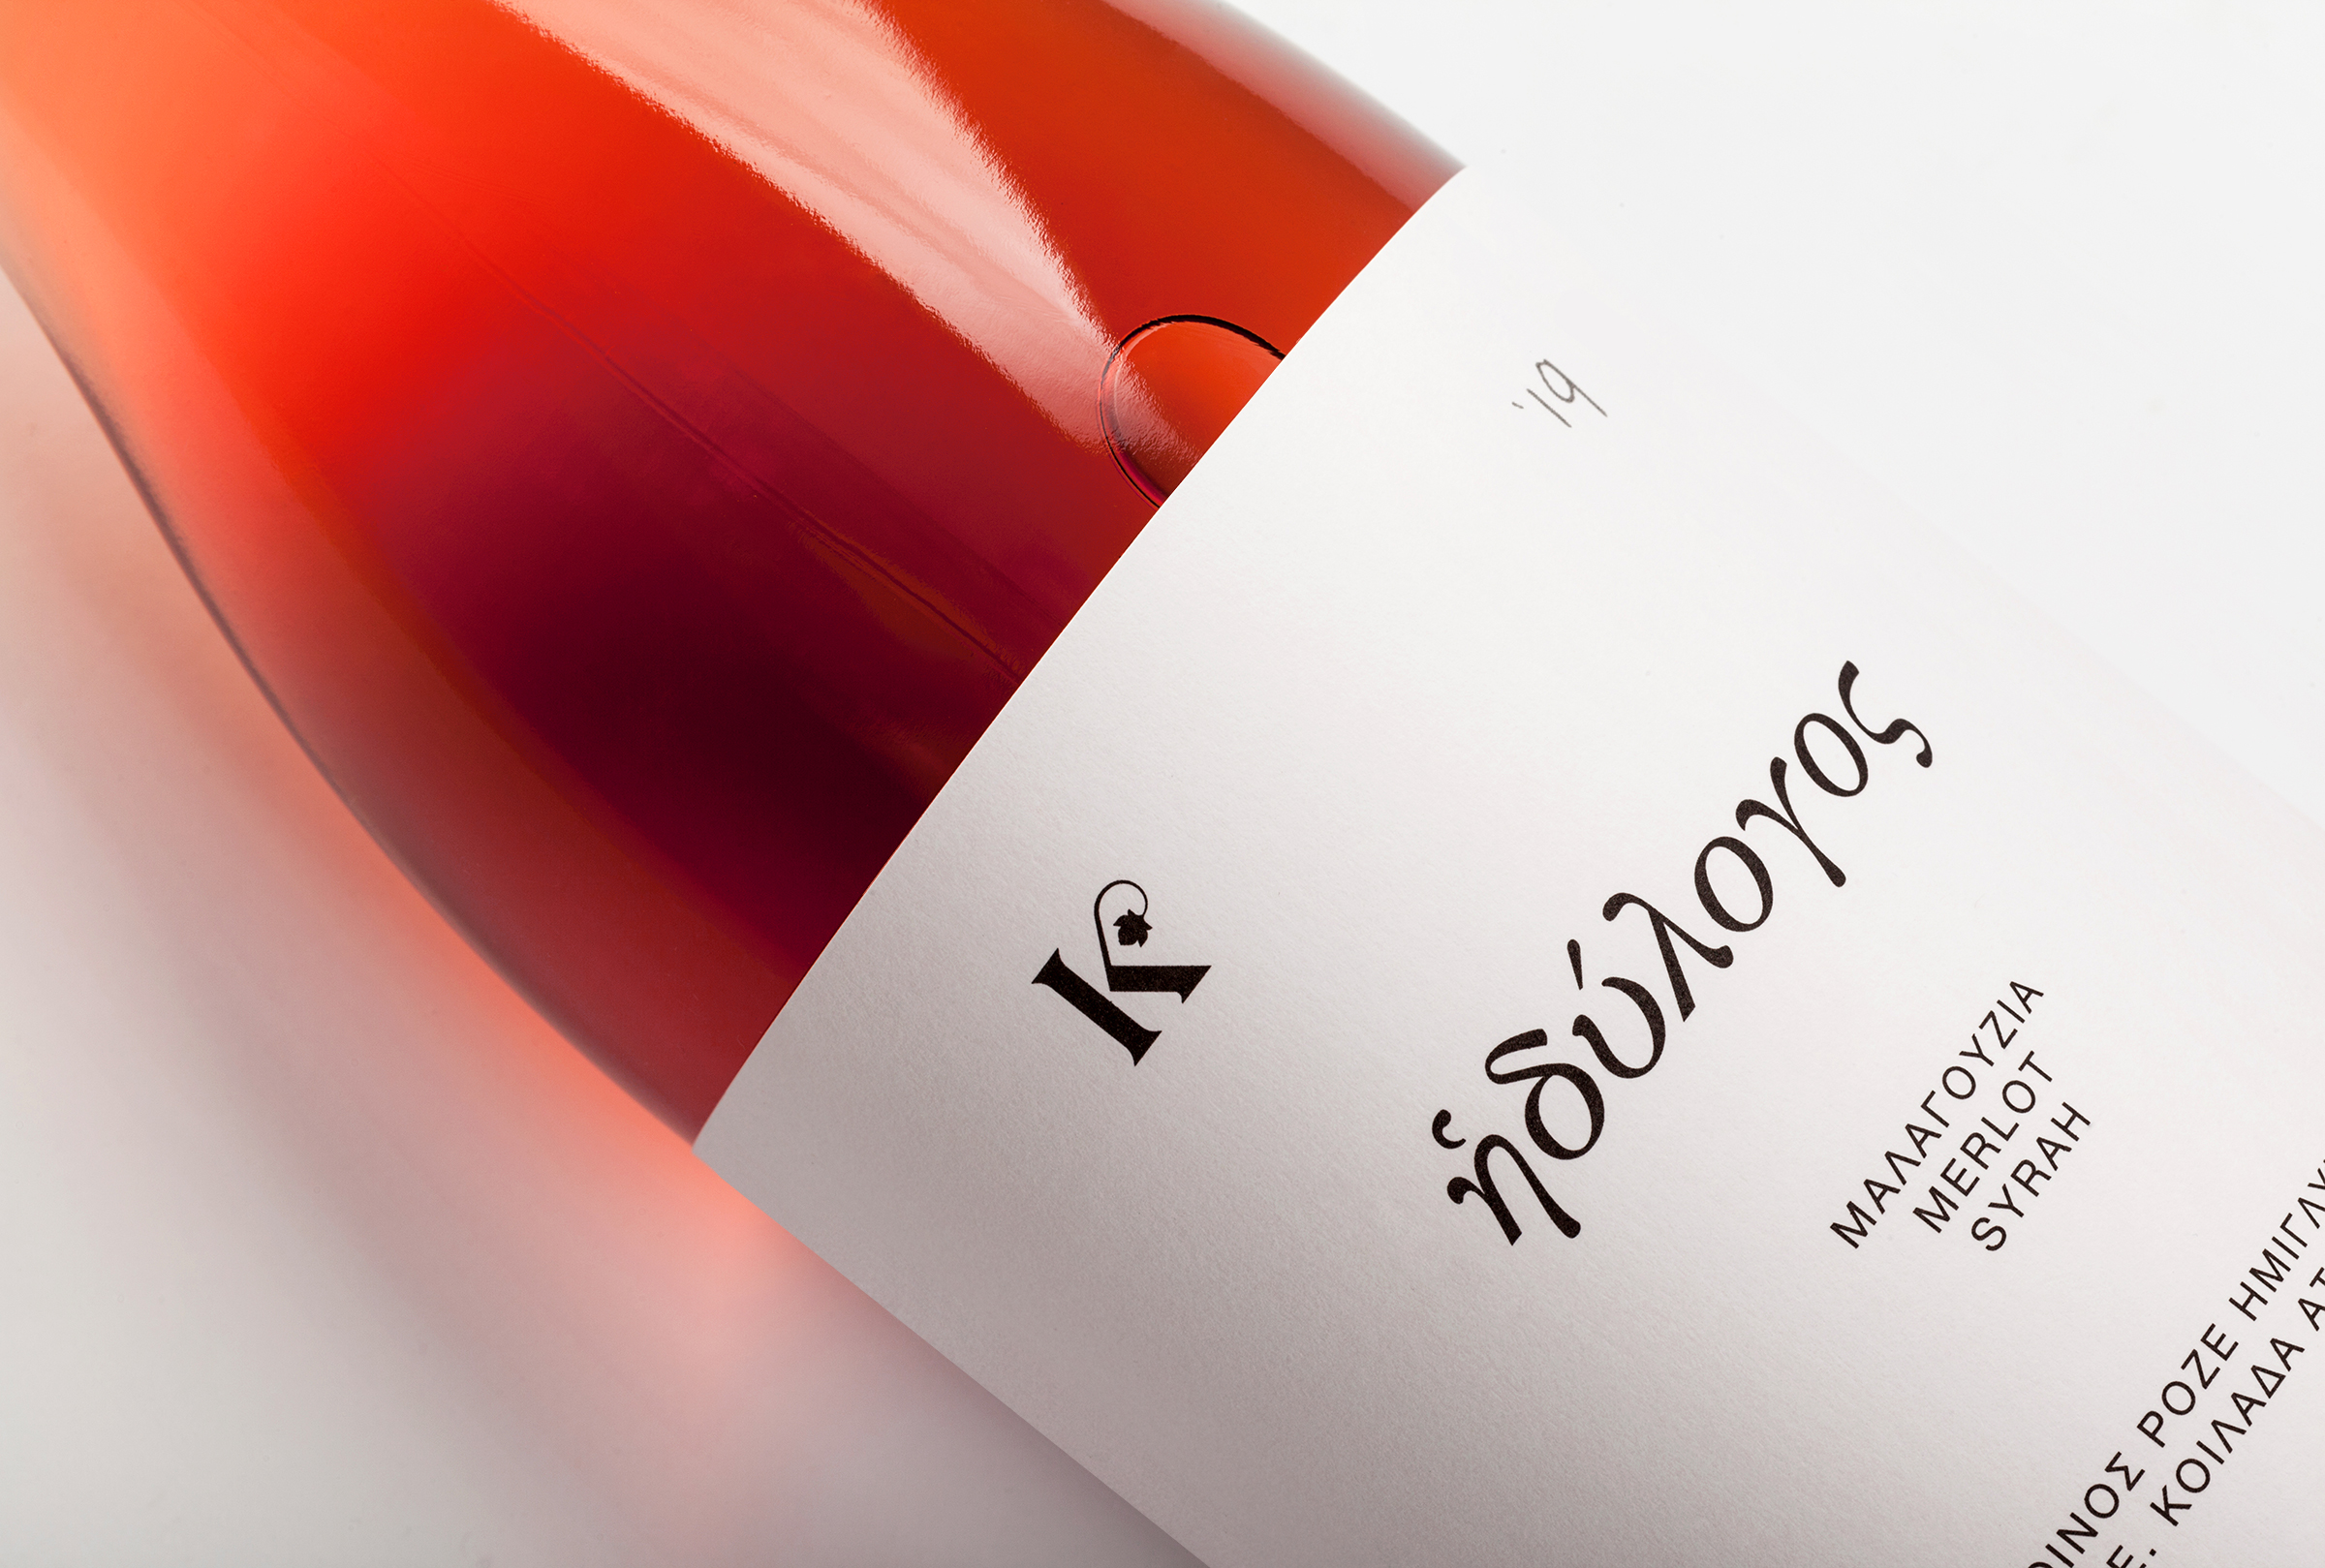 Hedylogos Wine Project by Loukas Chondros